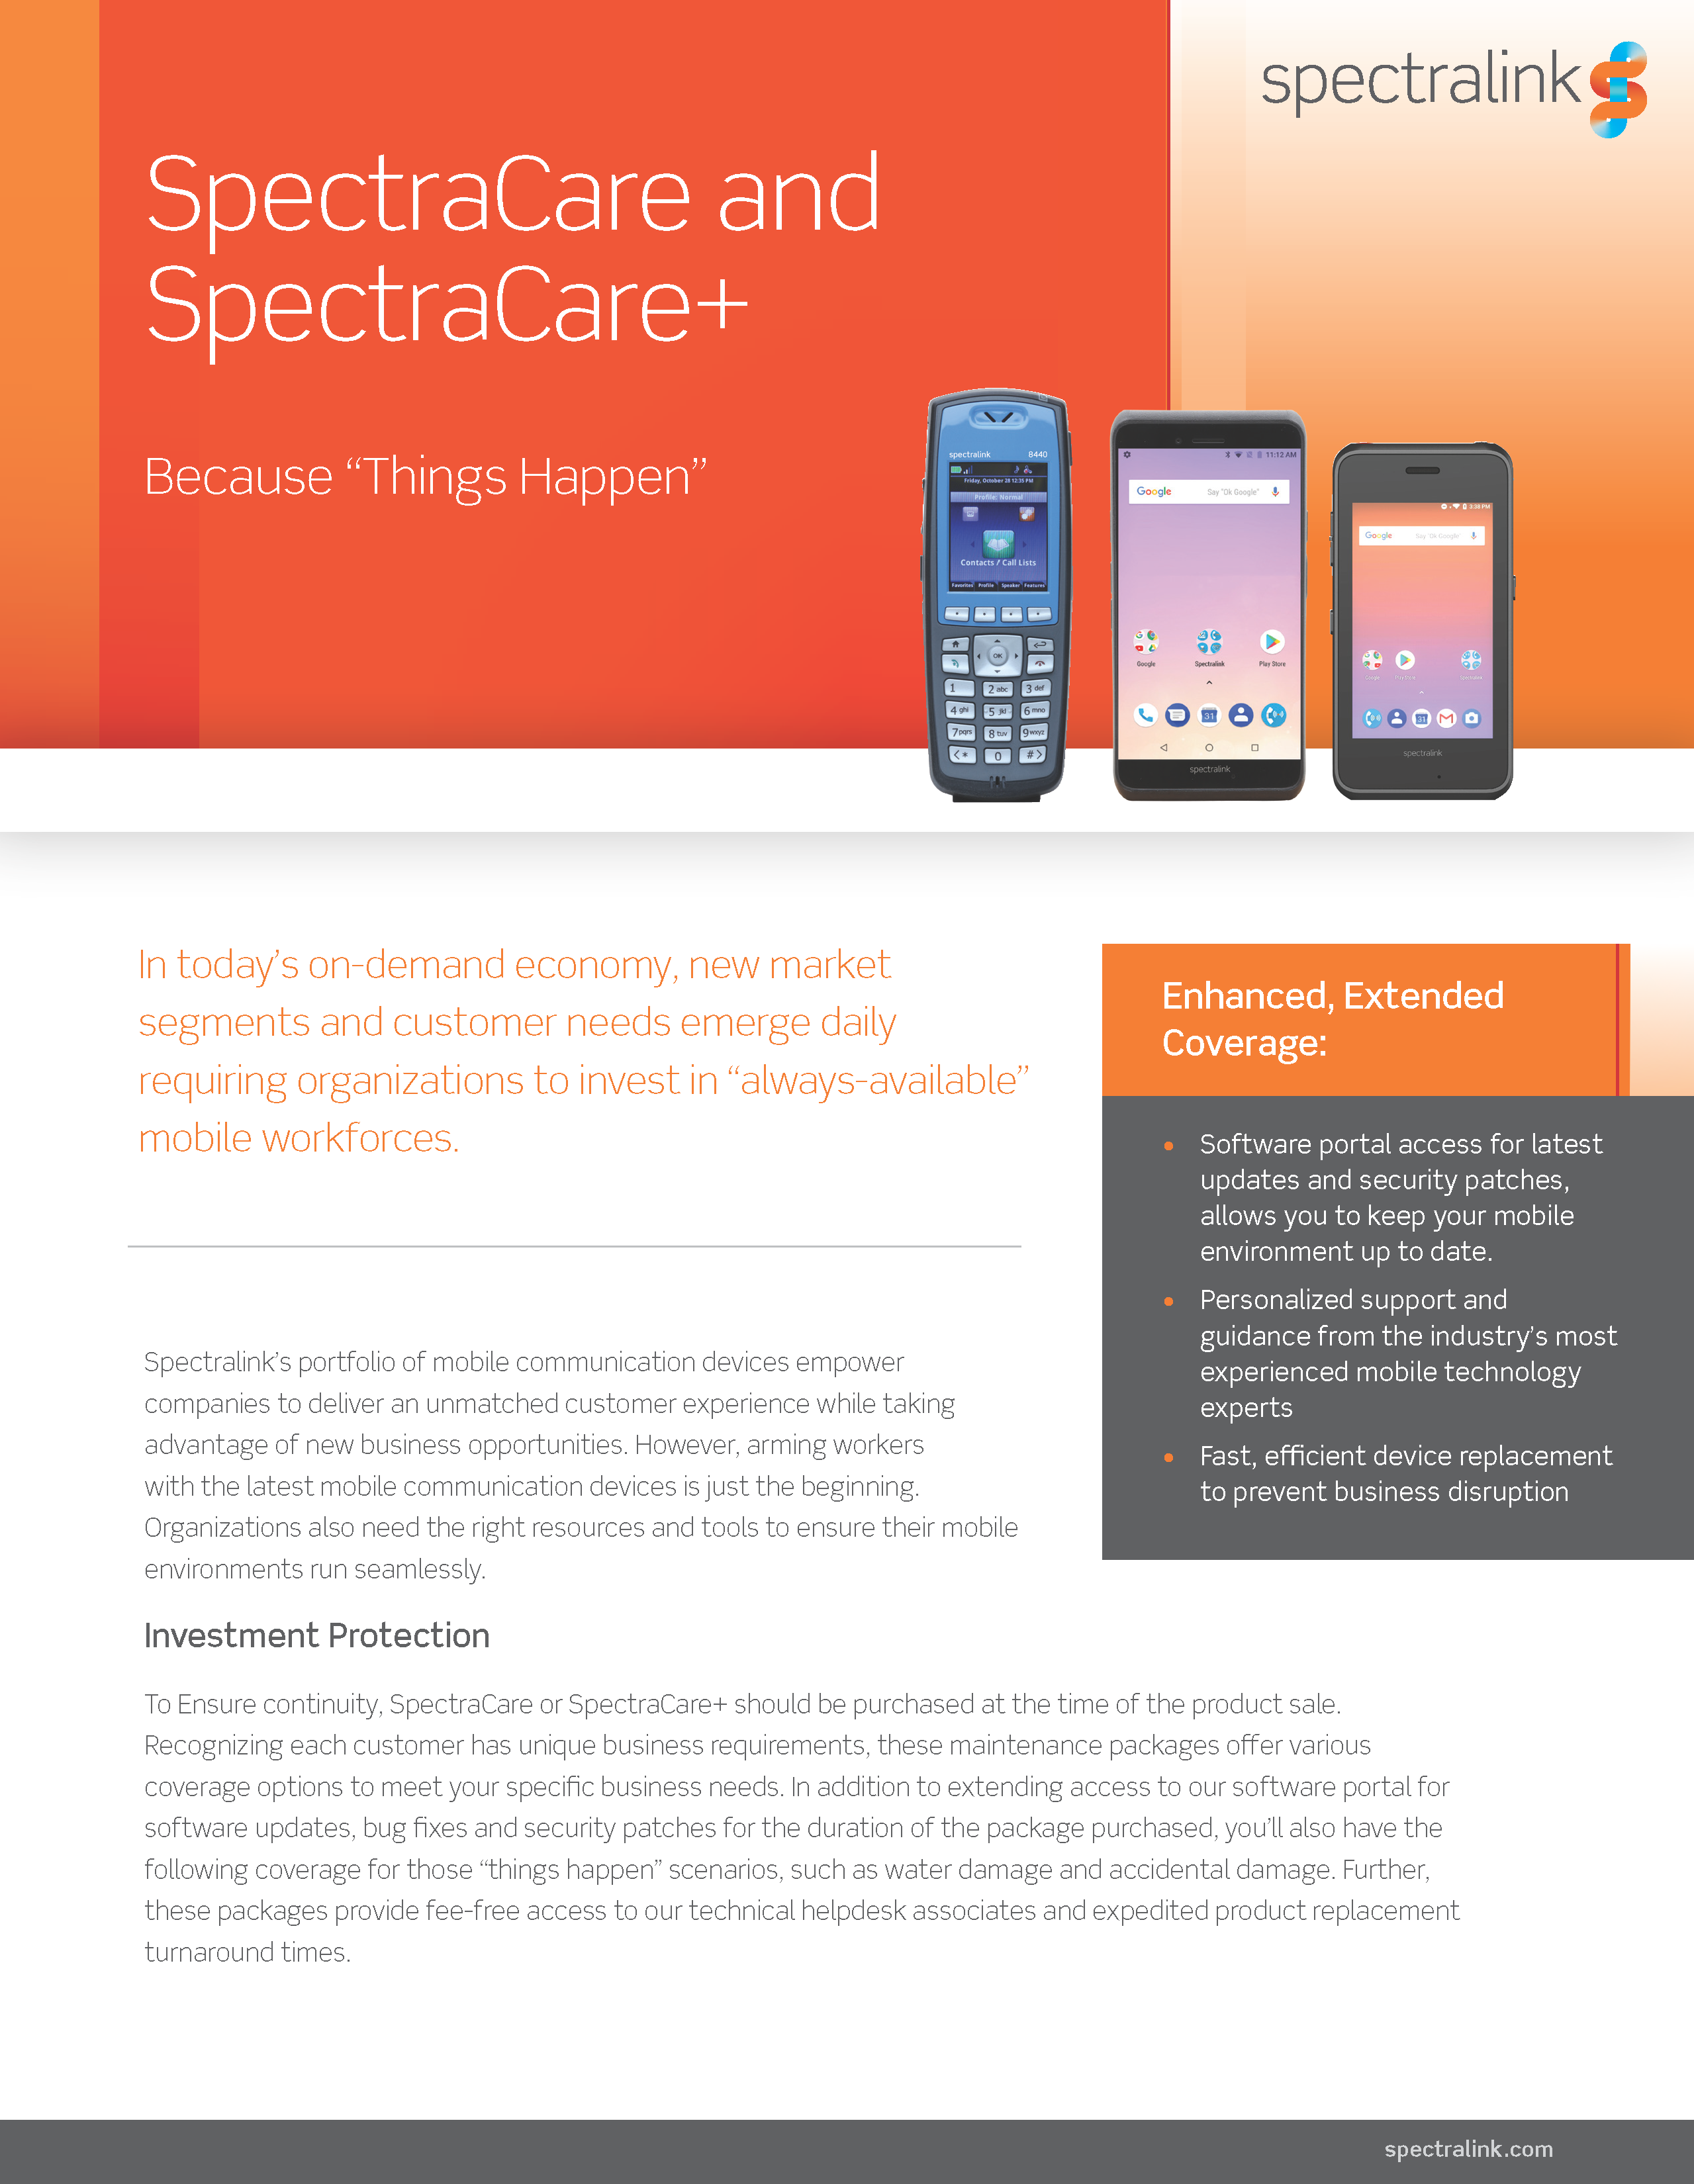 SpectraCare for Wi-Fi Handsets